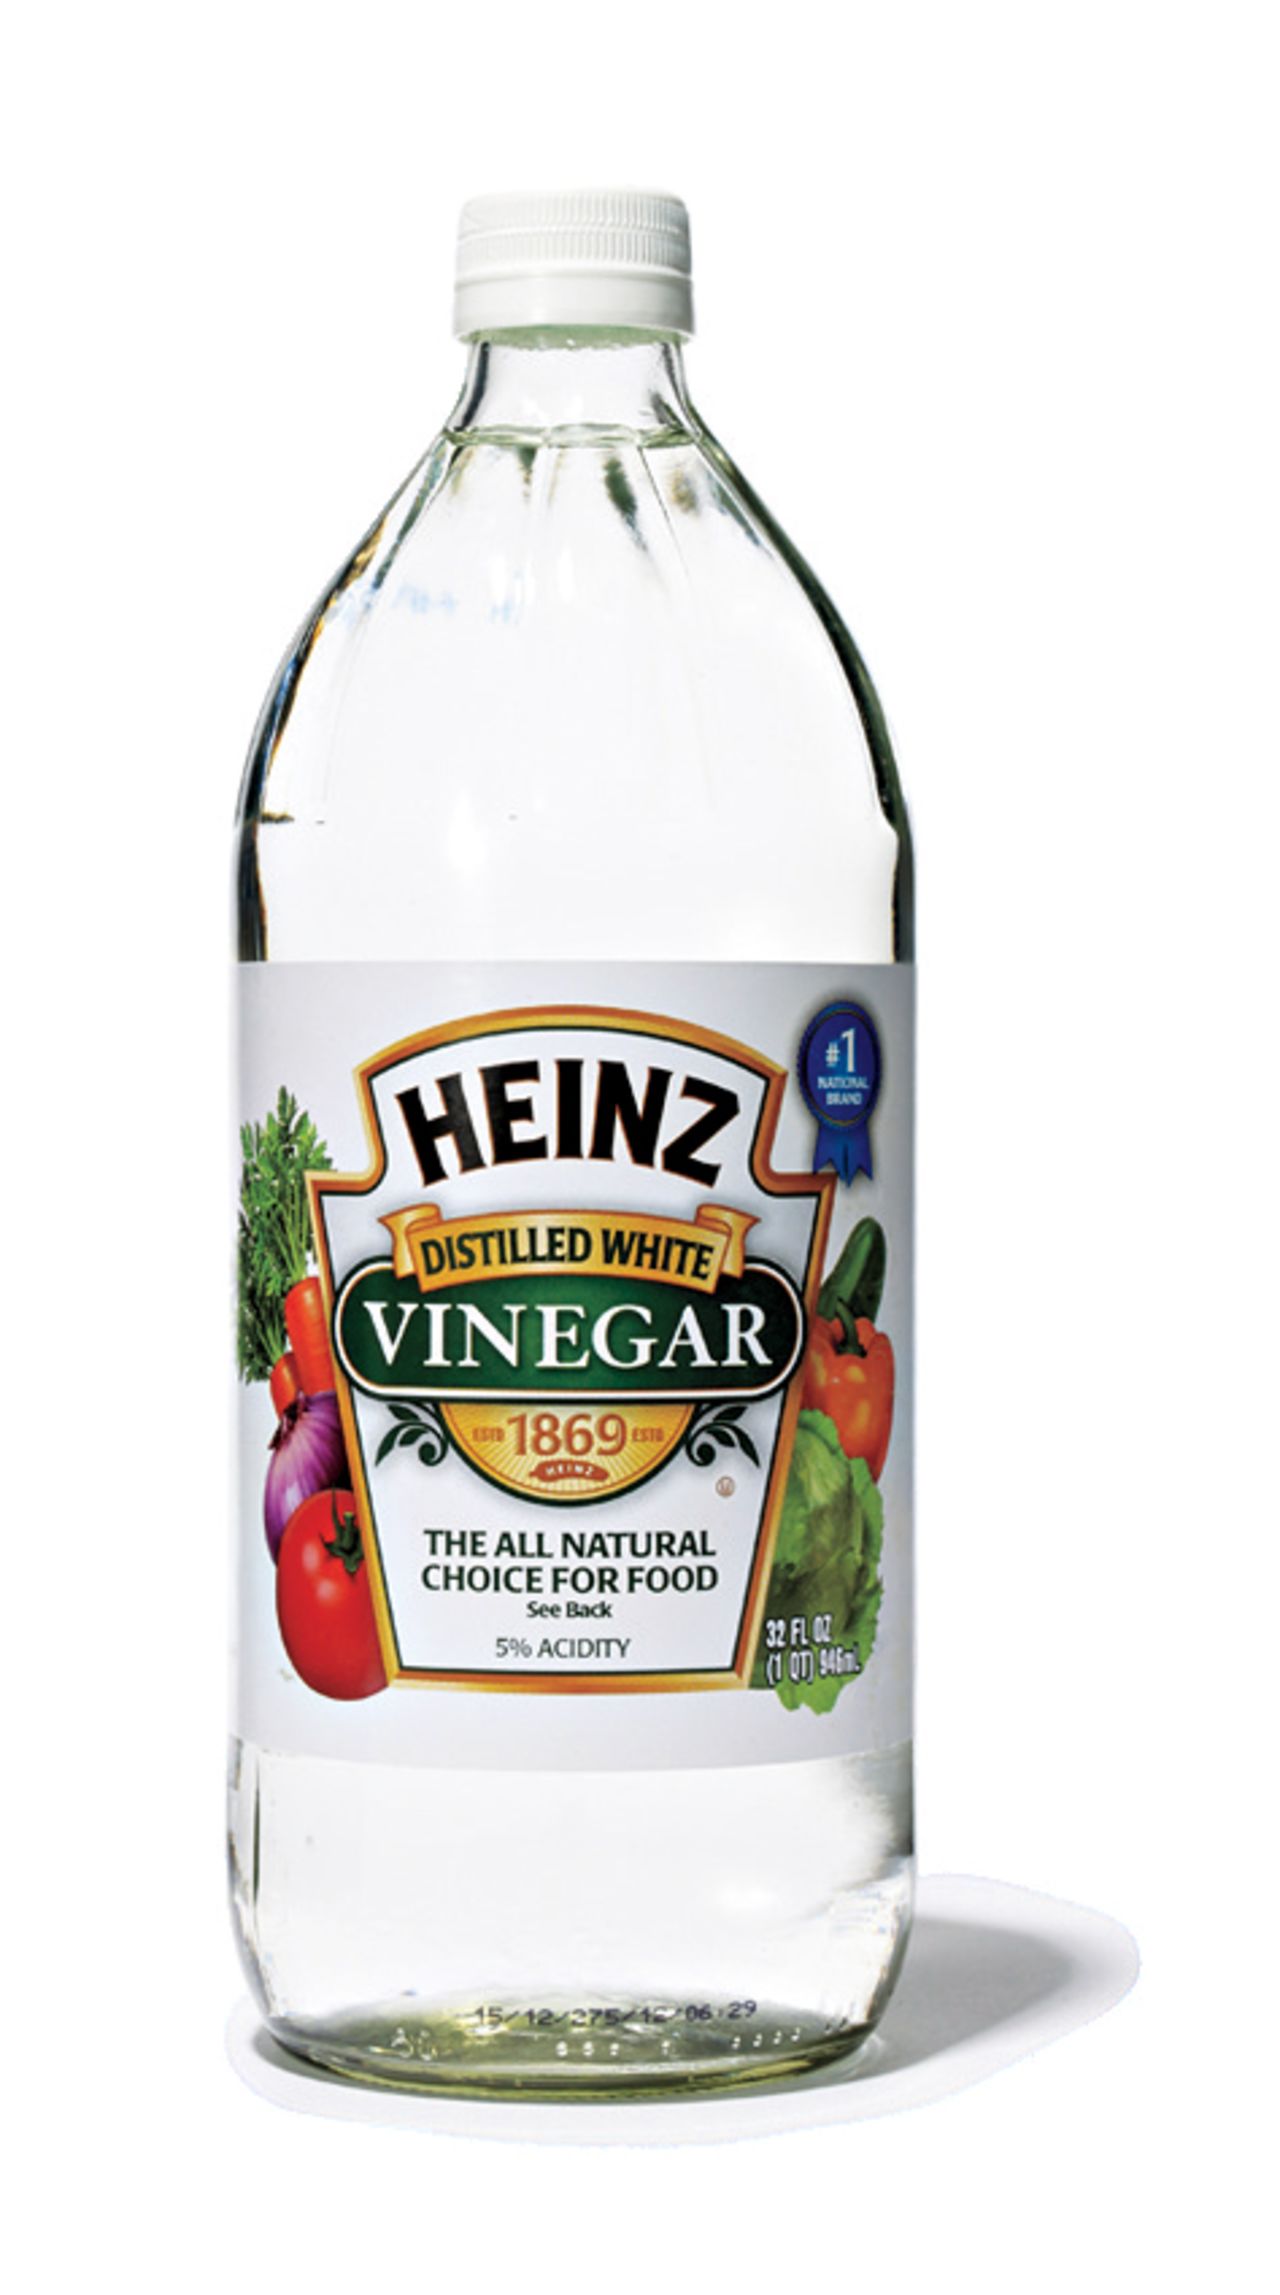 Vinegar: It inhibits the growth of mold, mildew, and some bacteria, so go nuts with it in the kitchen and bathroom, cleaning cutting boards and wiping soap residue from shower doors. But don't stop there. Spray it on the underarms of clothing and let soak for 30 minutes to deodorize! Mix it with an equal amount of warm water for a streak-free window cleaner! Remove rings left by wet glasses on wood by rubbing the rings with an equal mix of vinegar and melted beeswax! Pour it in the washer to rescue a forgotten load from funky despair—or sans clothes to refresh the machine!